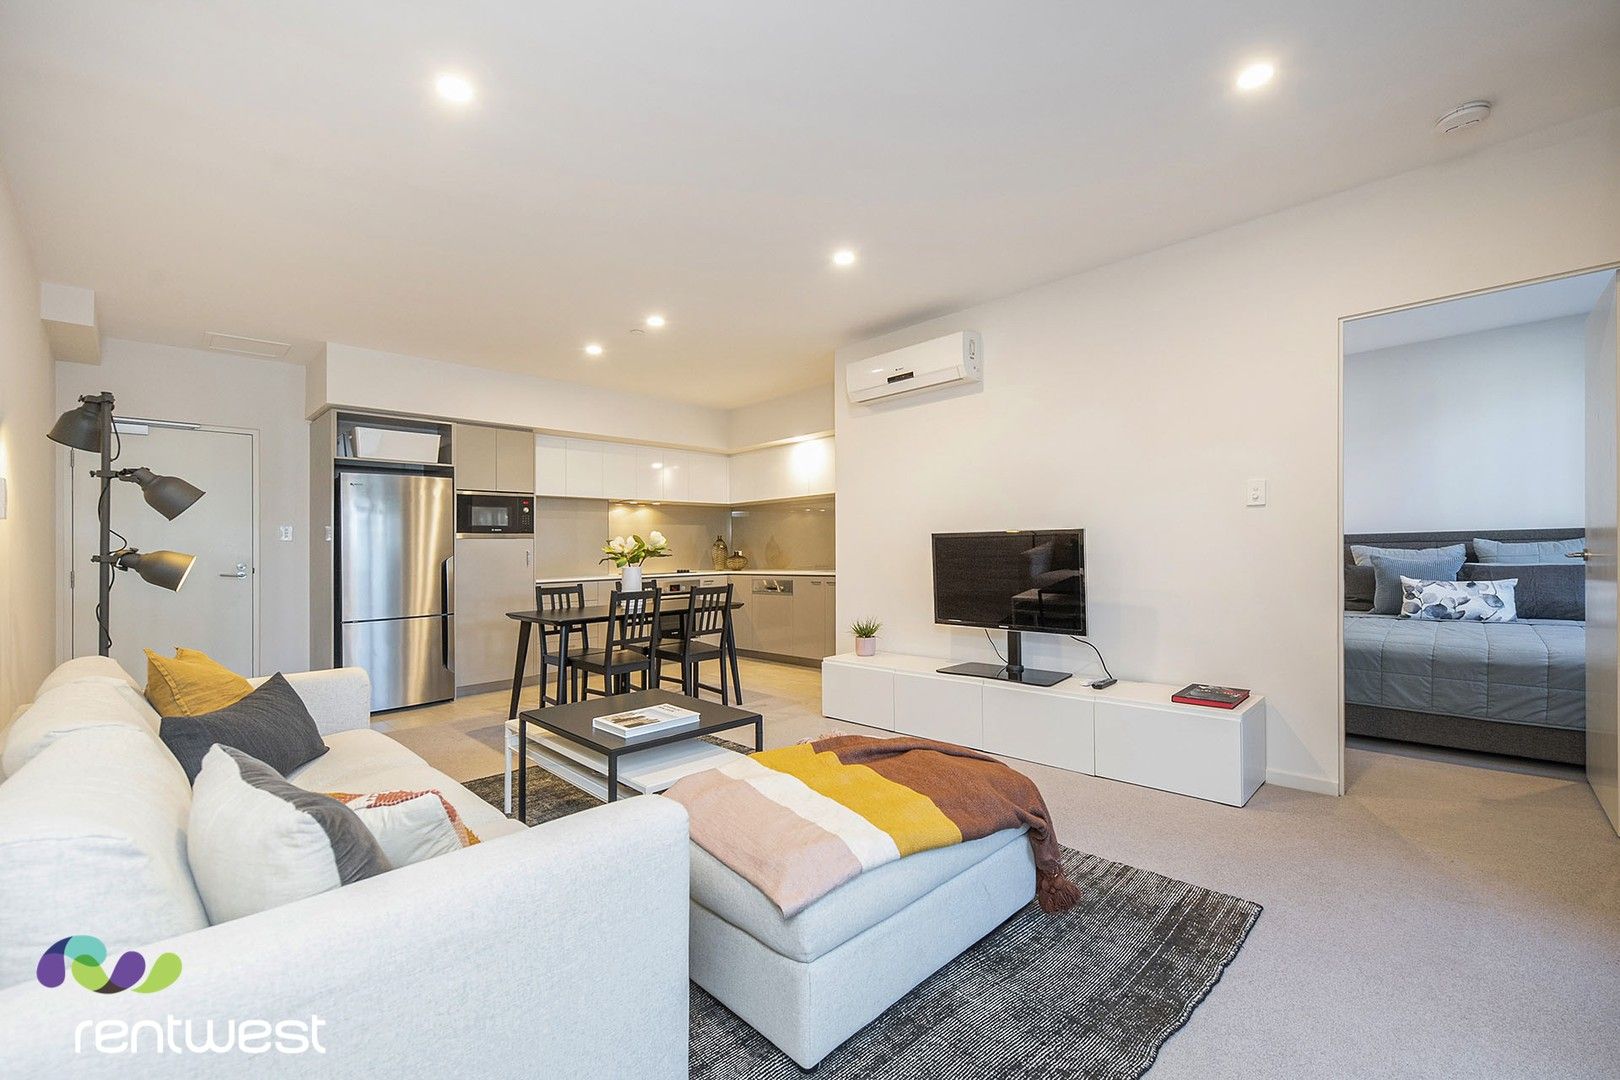 2 bedrooms Apartment / Unit / Flat in 404/63 Adelaide Terrace EAST PERTH WA, 6004